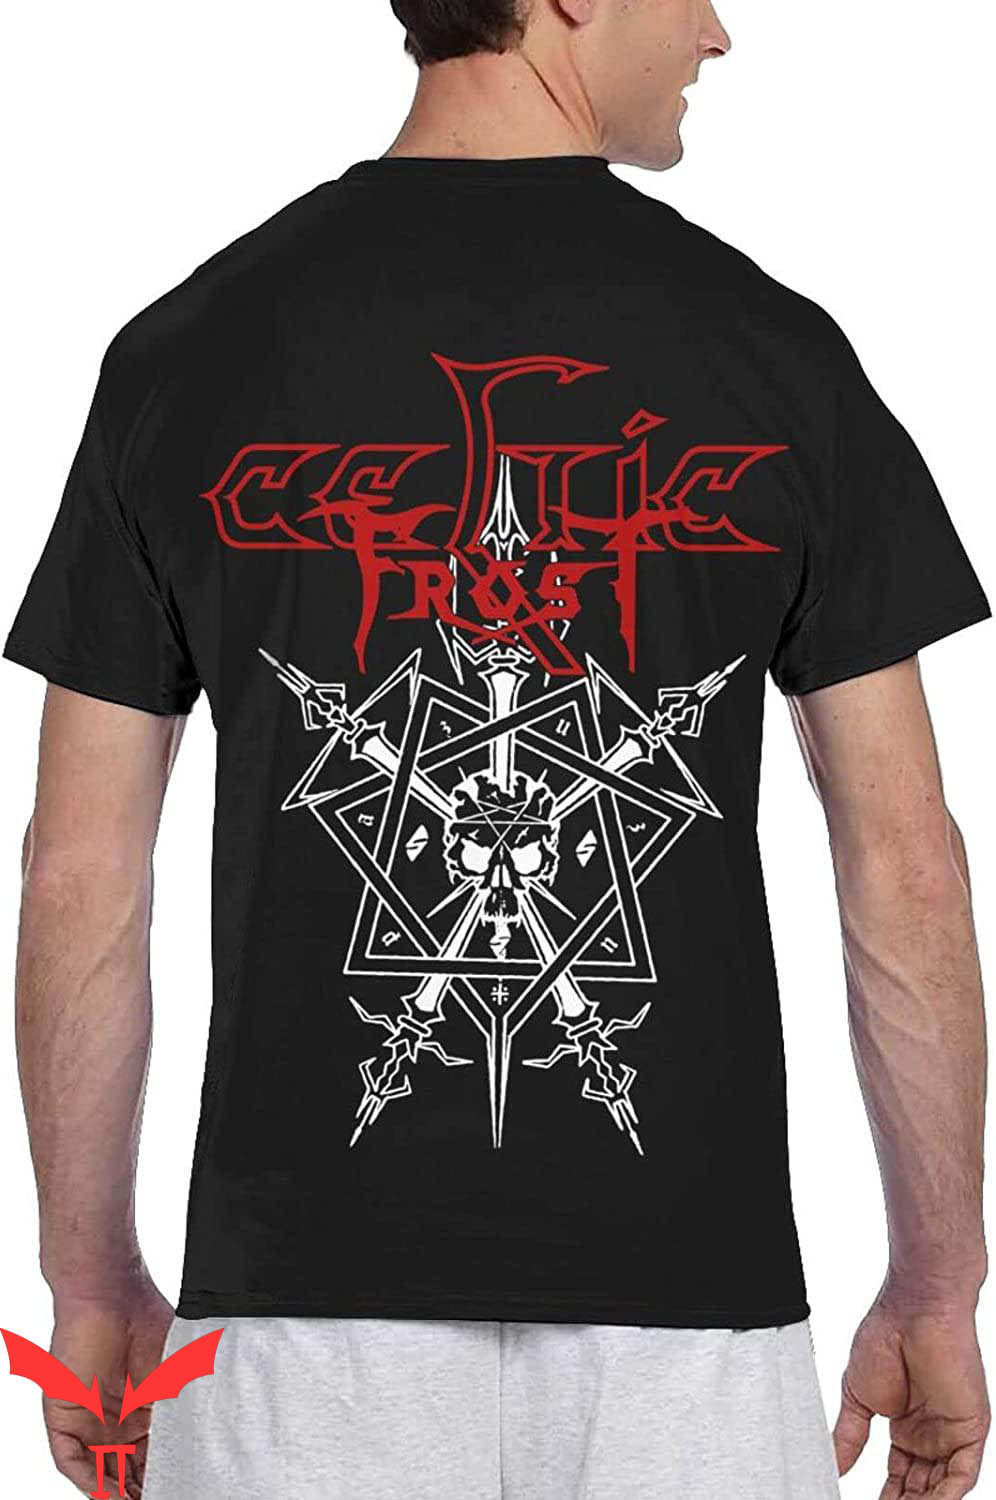 Celtic Frost T-Shirt Extreme Metal Band Logo Cool Rock Tee